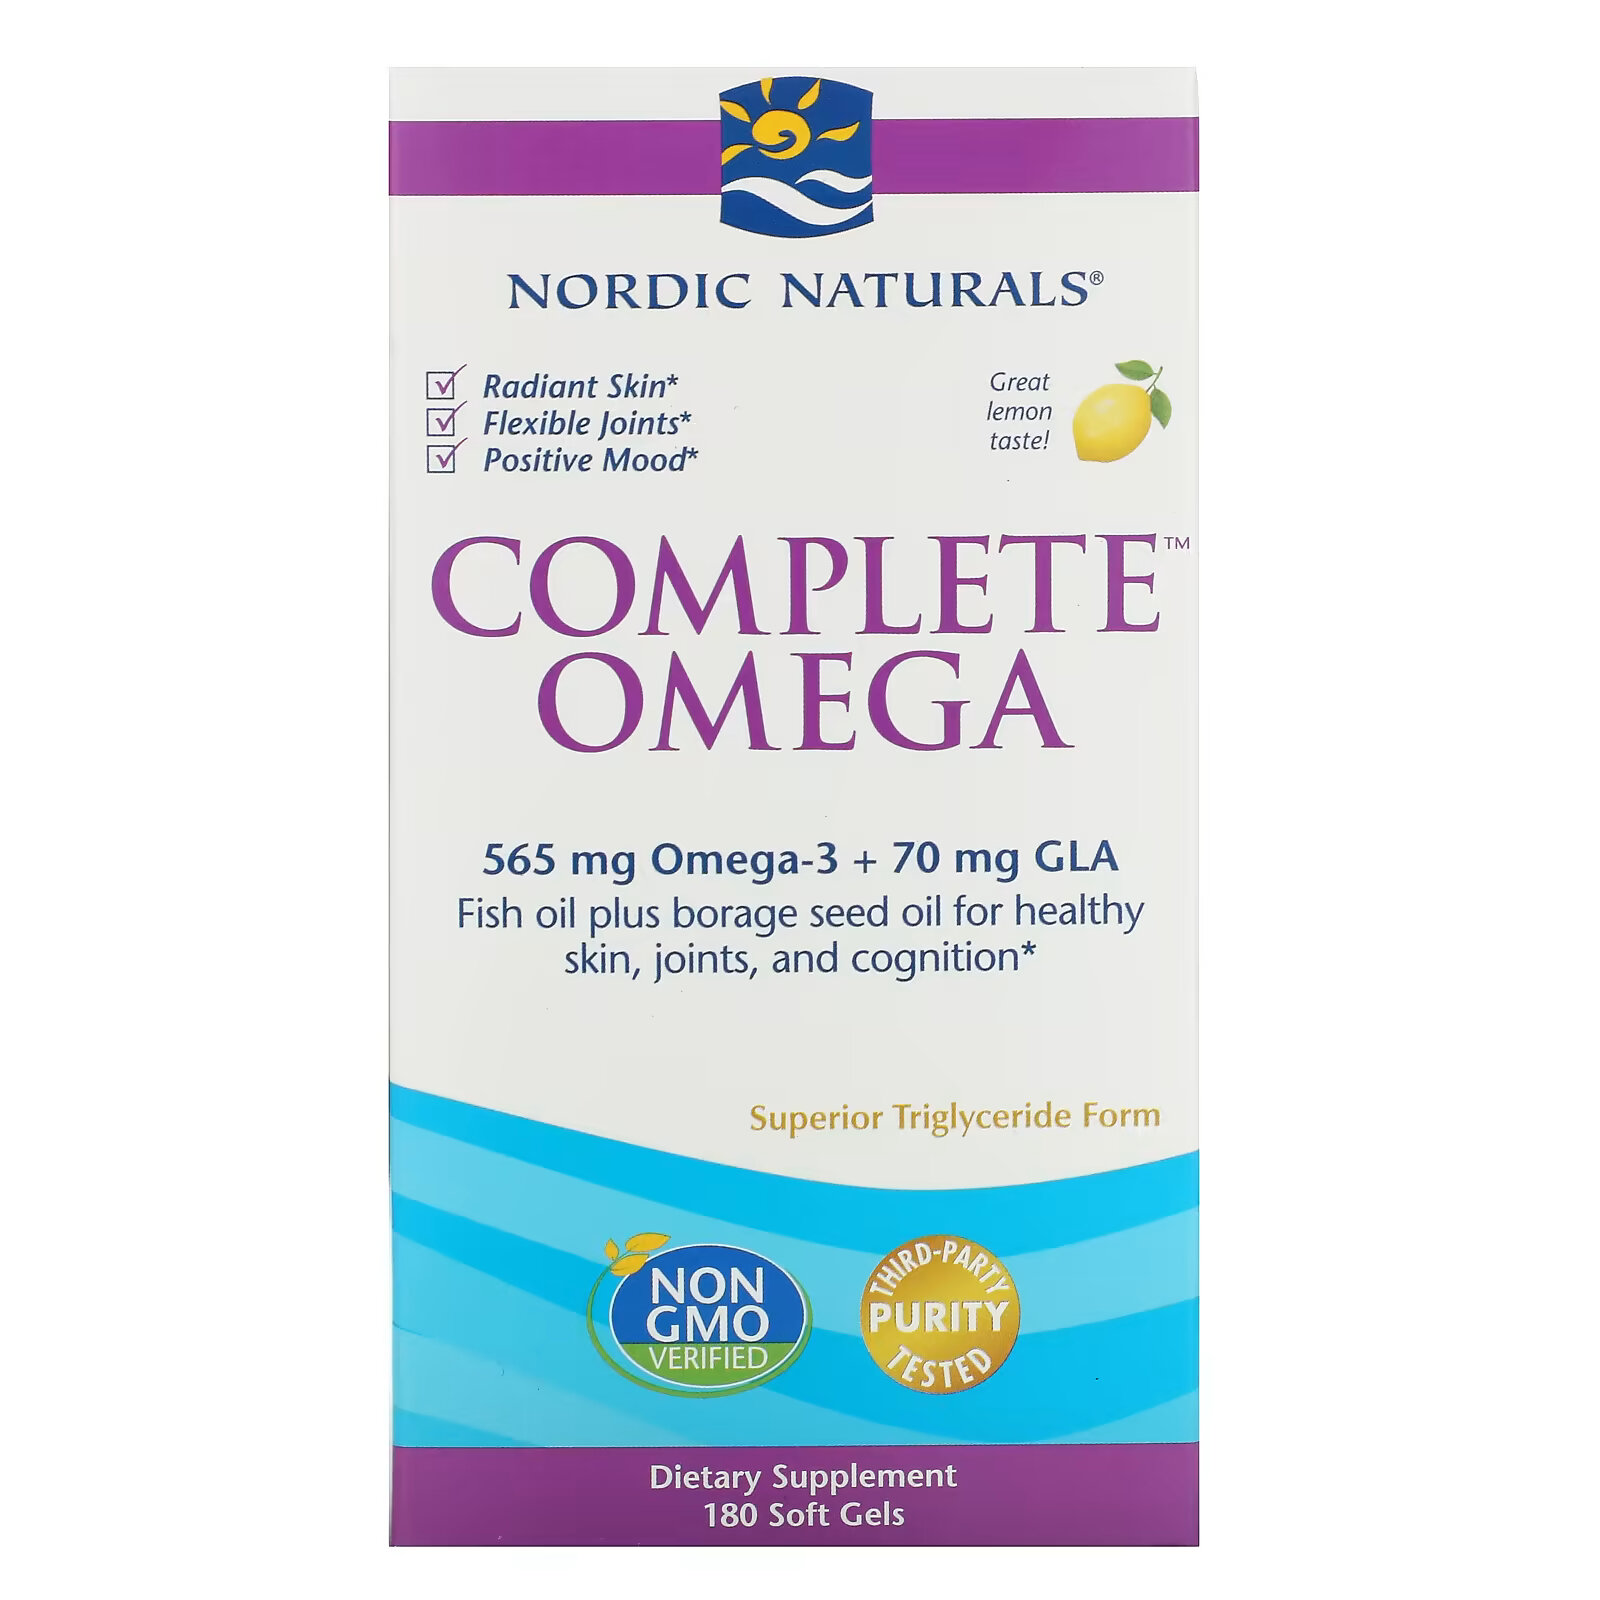 nordic naturals omega joint xtra 1000 мг 90 гелевых капсул Nordic Naturals, Complete Omega, лимонный вкус, 1000 мг, 180 гелевых капсул